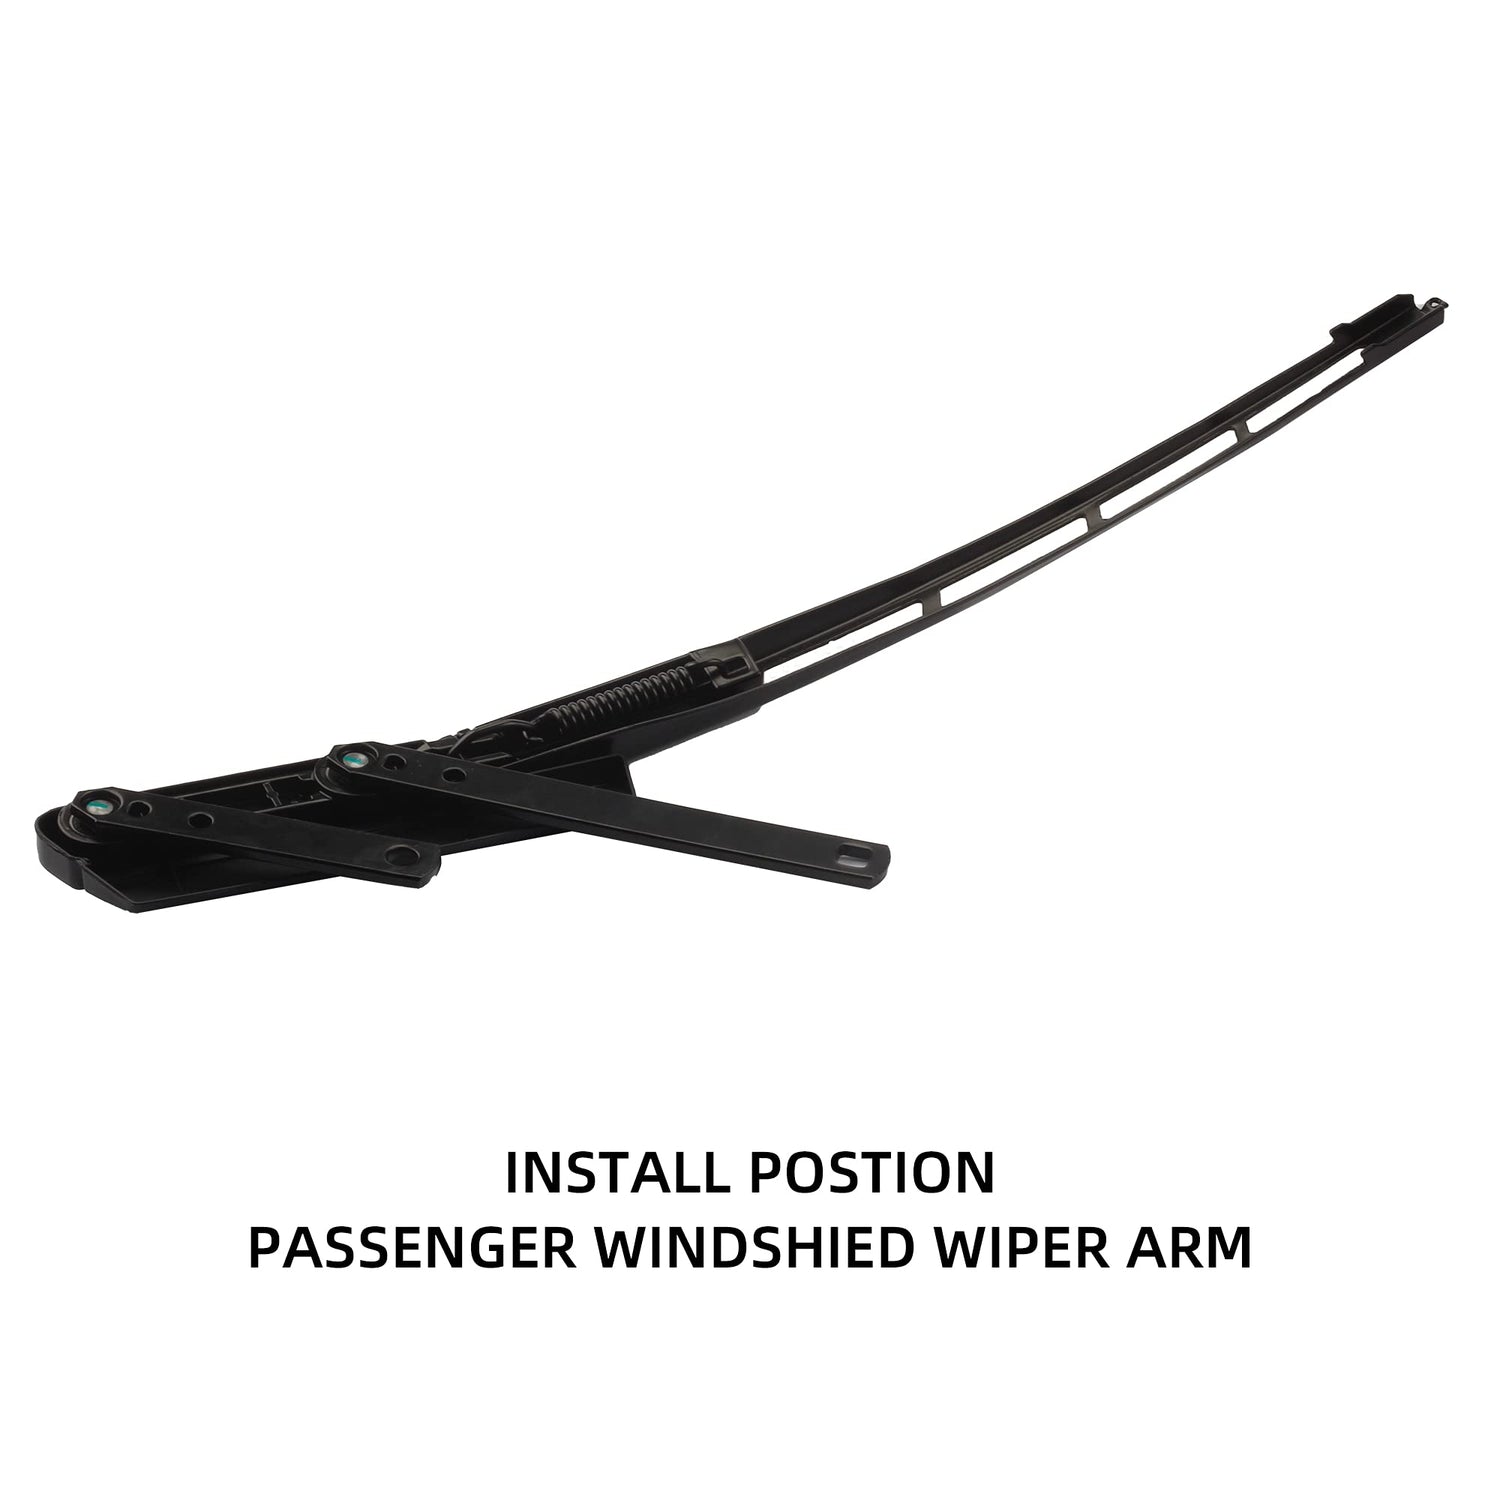 2007-2016 Audi Q7 Front Right Passenger Side Windshield Wiper Arm Replacement-4L1955408B - Dasbecan